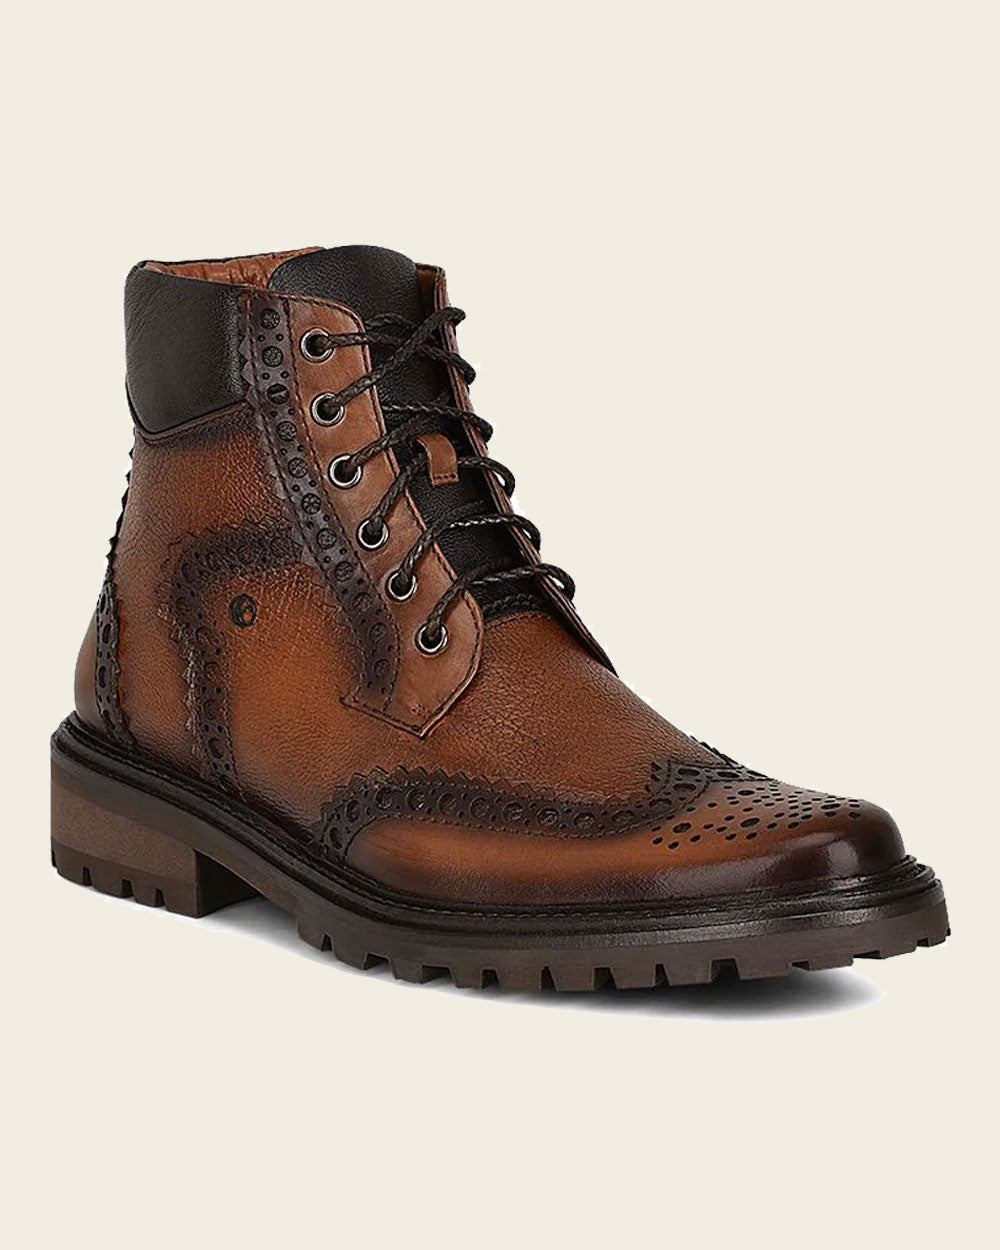 With meticulous attention to detail, this boot seamlessly combines classic design with modern elements for a standout look on any occasion. Here's why you'll love it: